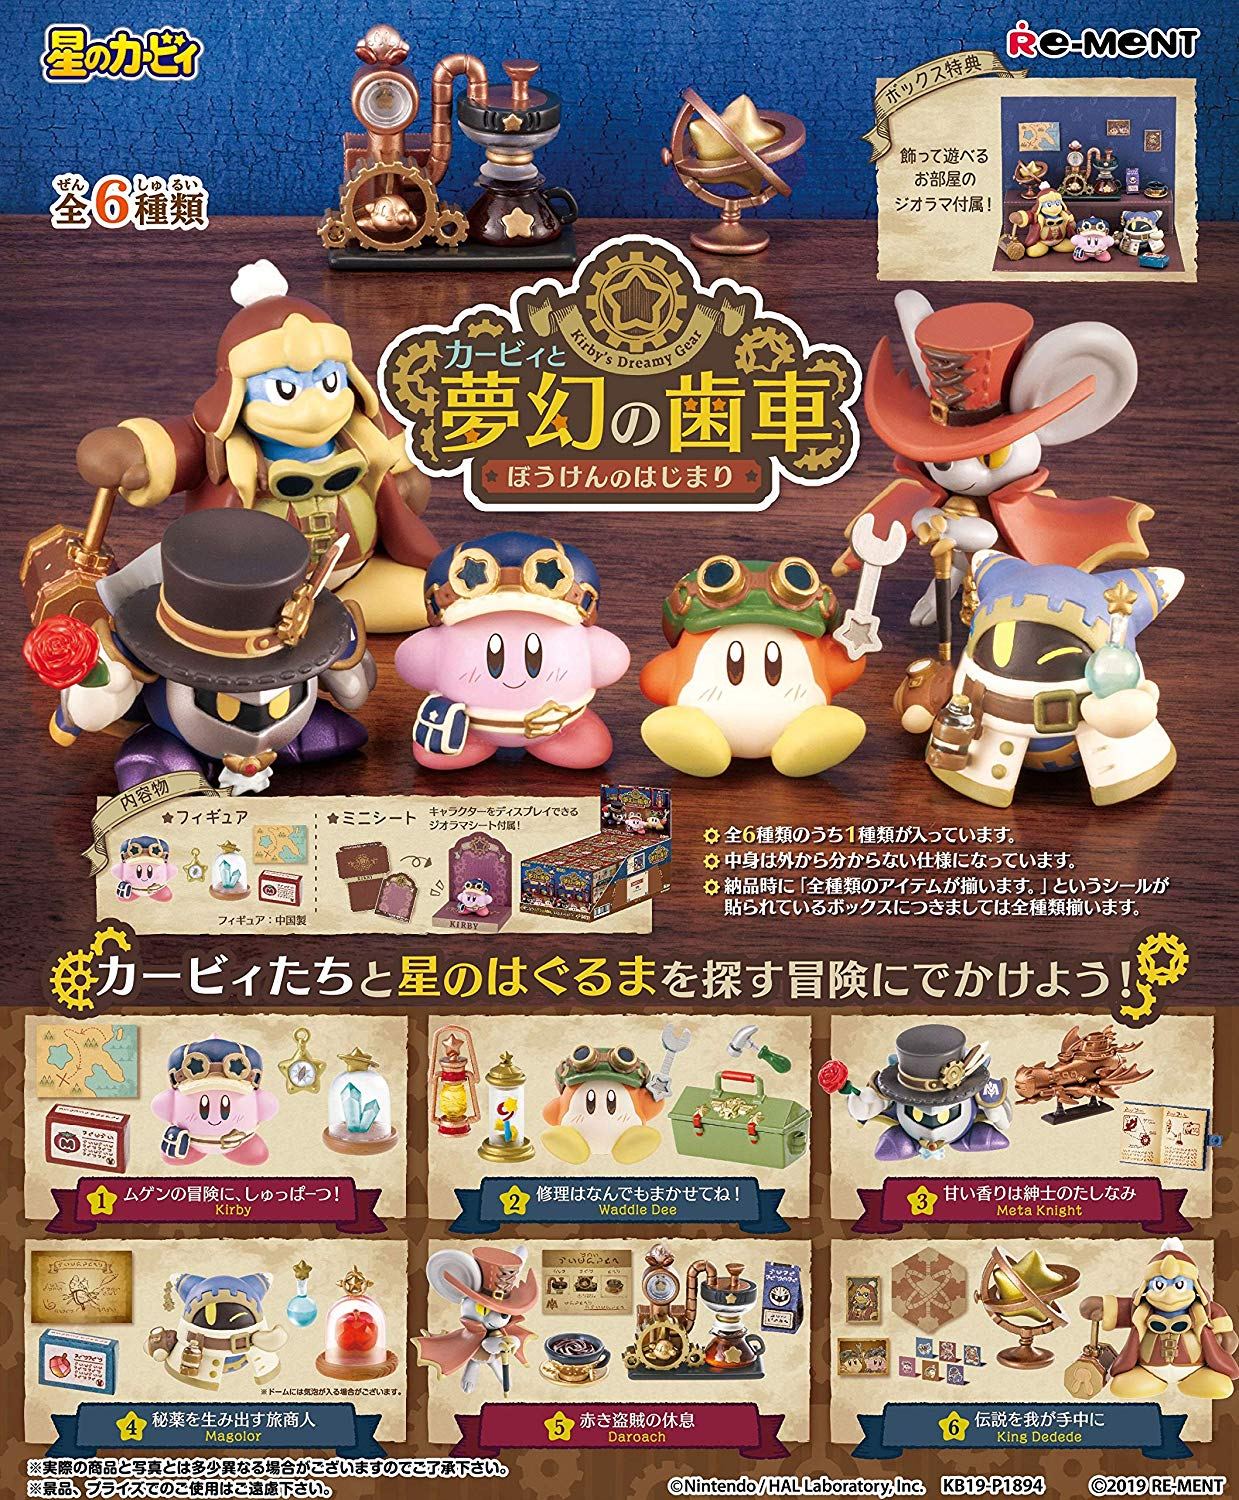 KIRBY'S DREAM LAND: KIRBY'S DREAM GEAR -BEGINNING OF THE ADVENTURE- (SET OF 6 PIECES) Re-ment